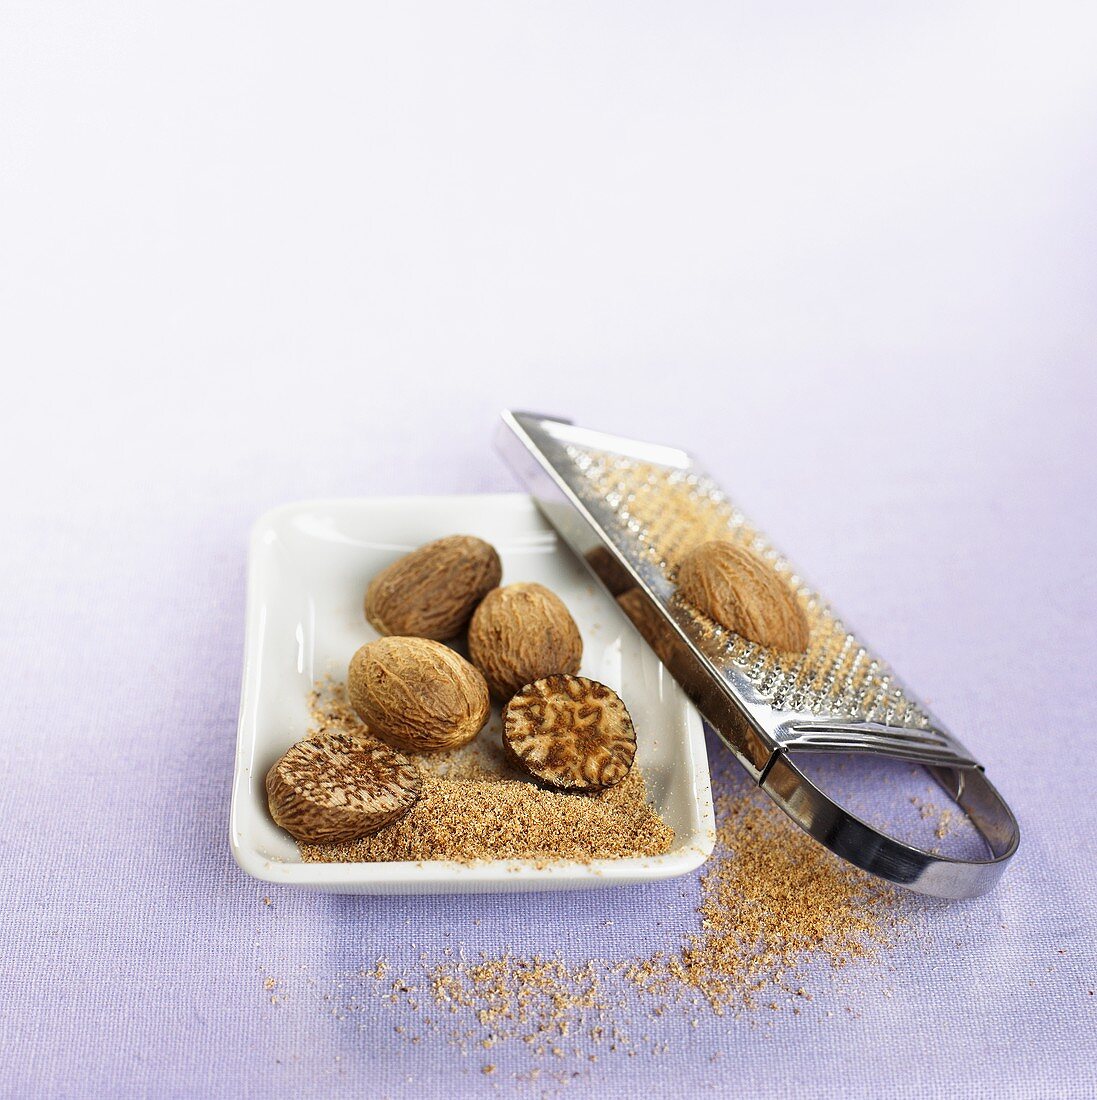 Grated nutmeg, whole nutmegs and grater